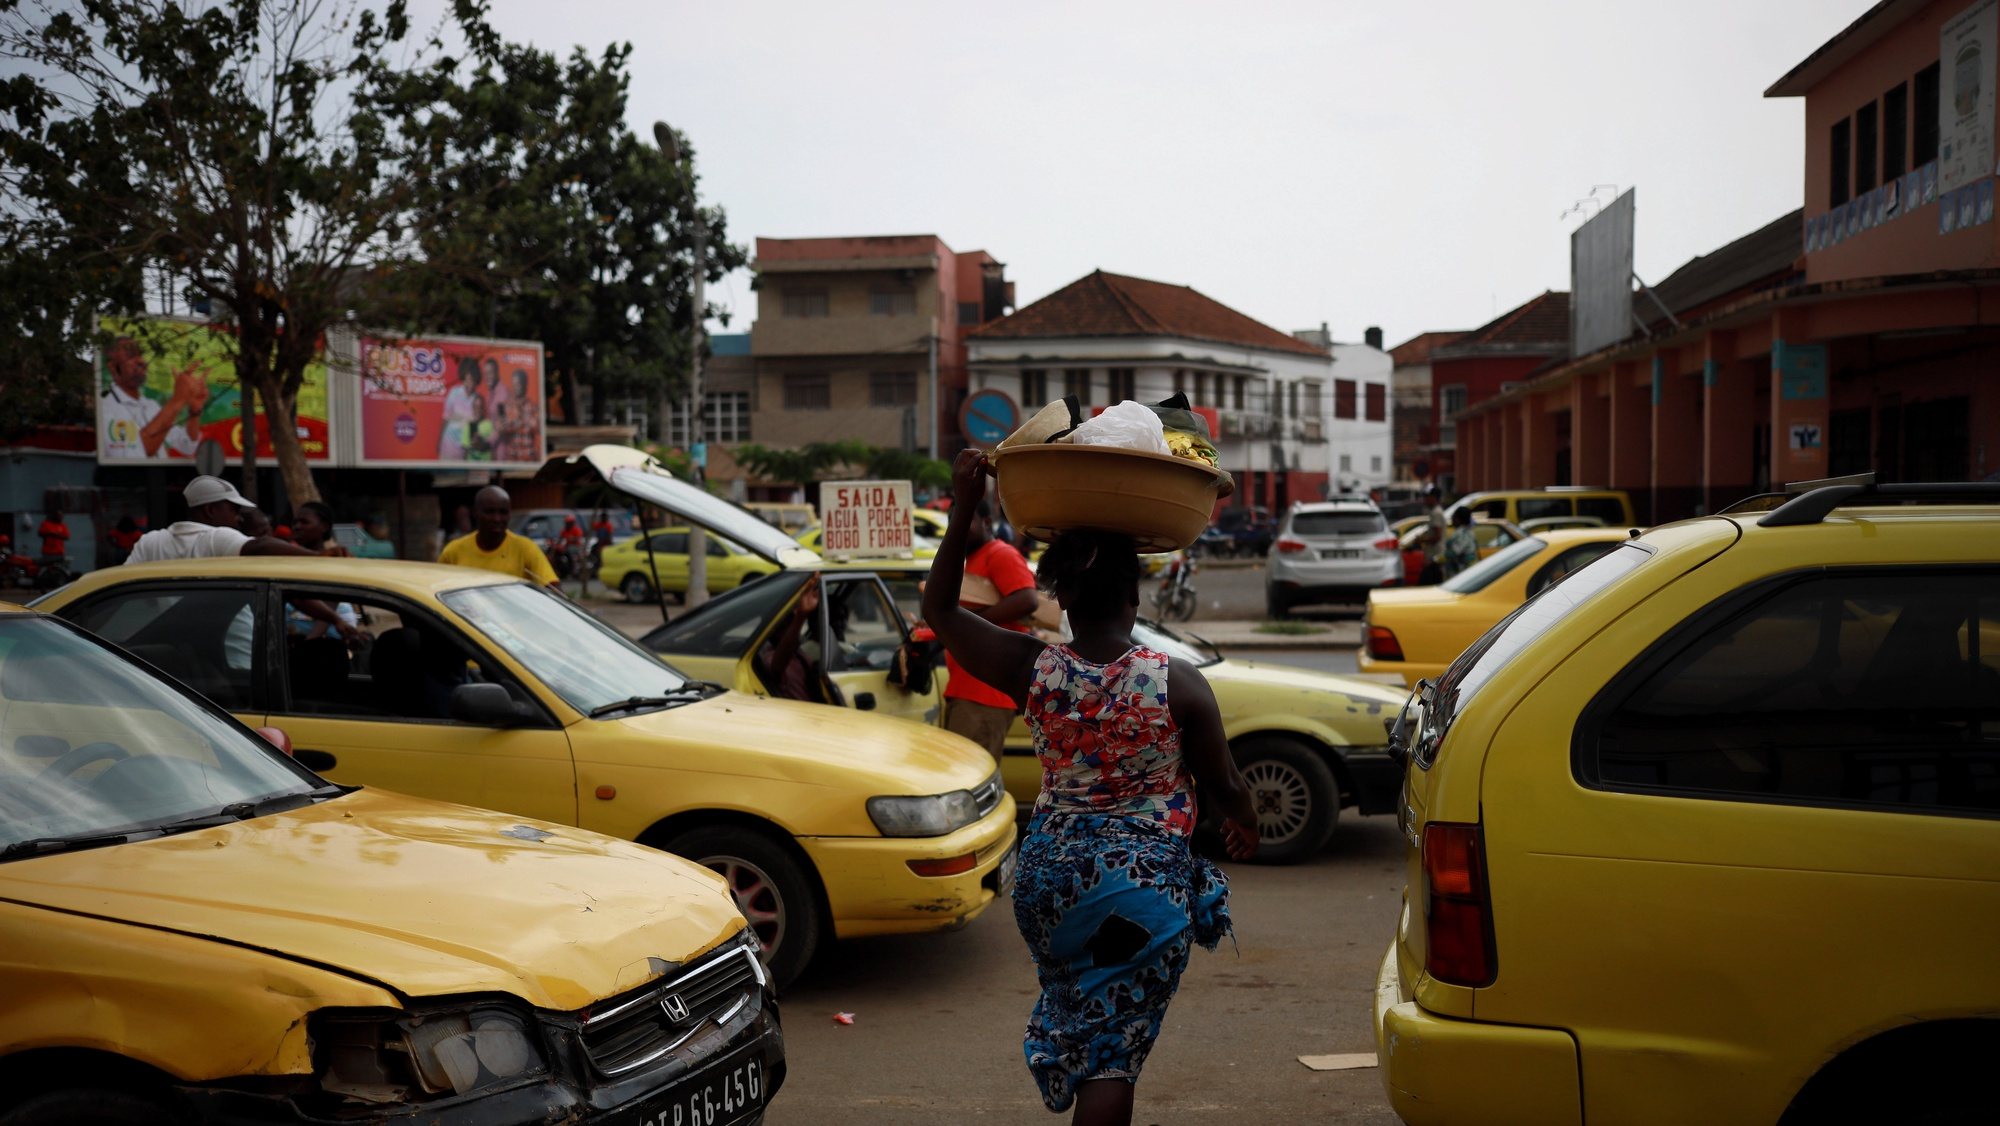 epa10196313 A street vendor walks between cars in Sao Tome, Sao Tome and Principe, 20 September 2022 (issued 21 September 2022). The African island nation of Sao Tome and Principe will hold its legislative elections on 25 September 2022.  EPA/ESTELA SILVA